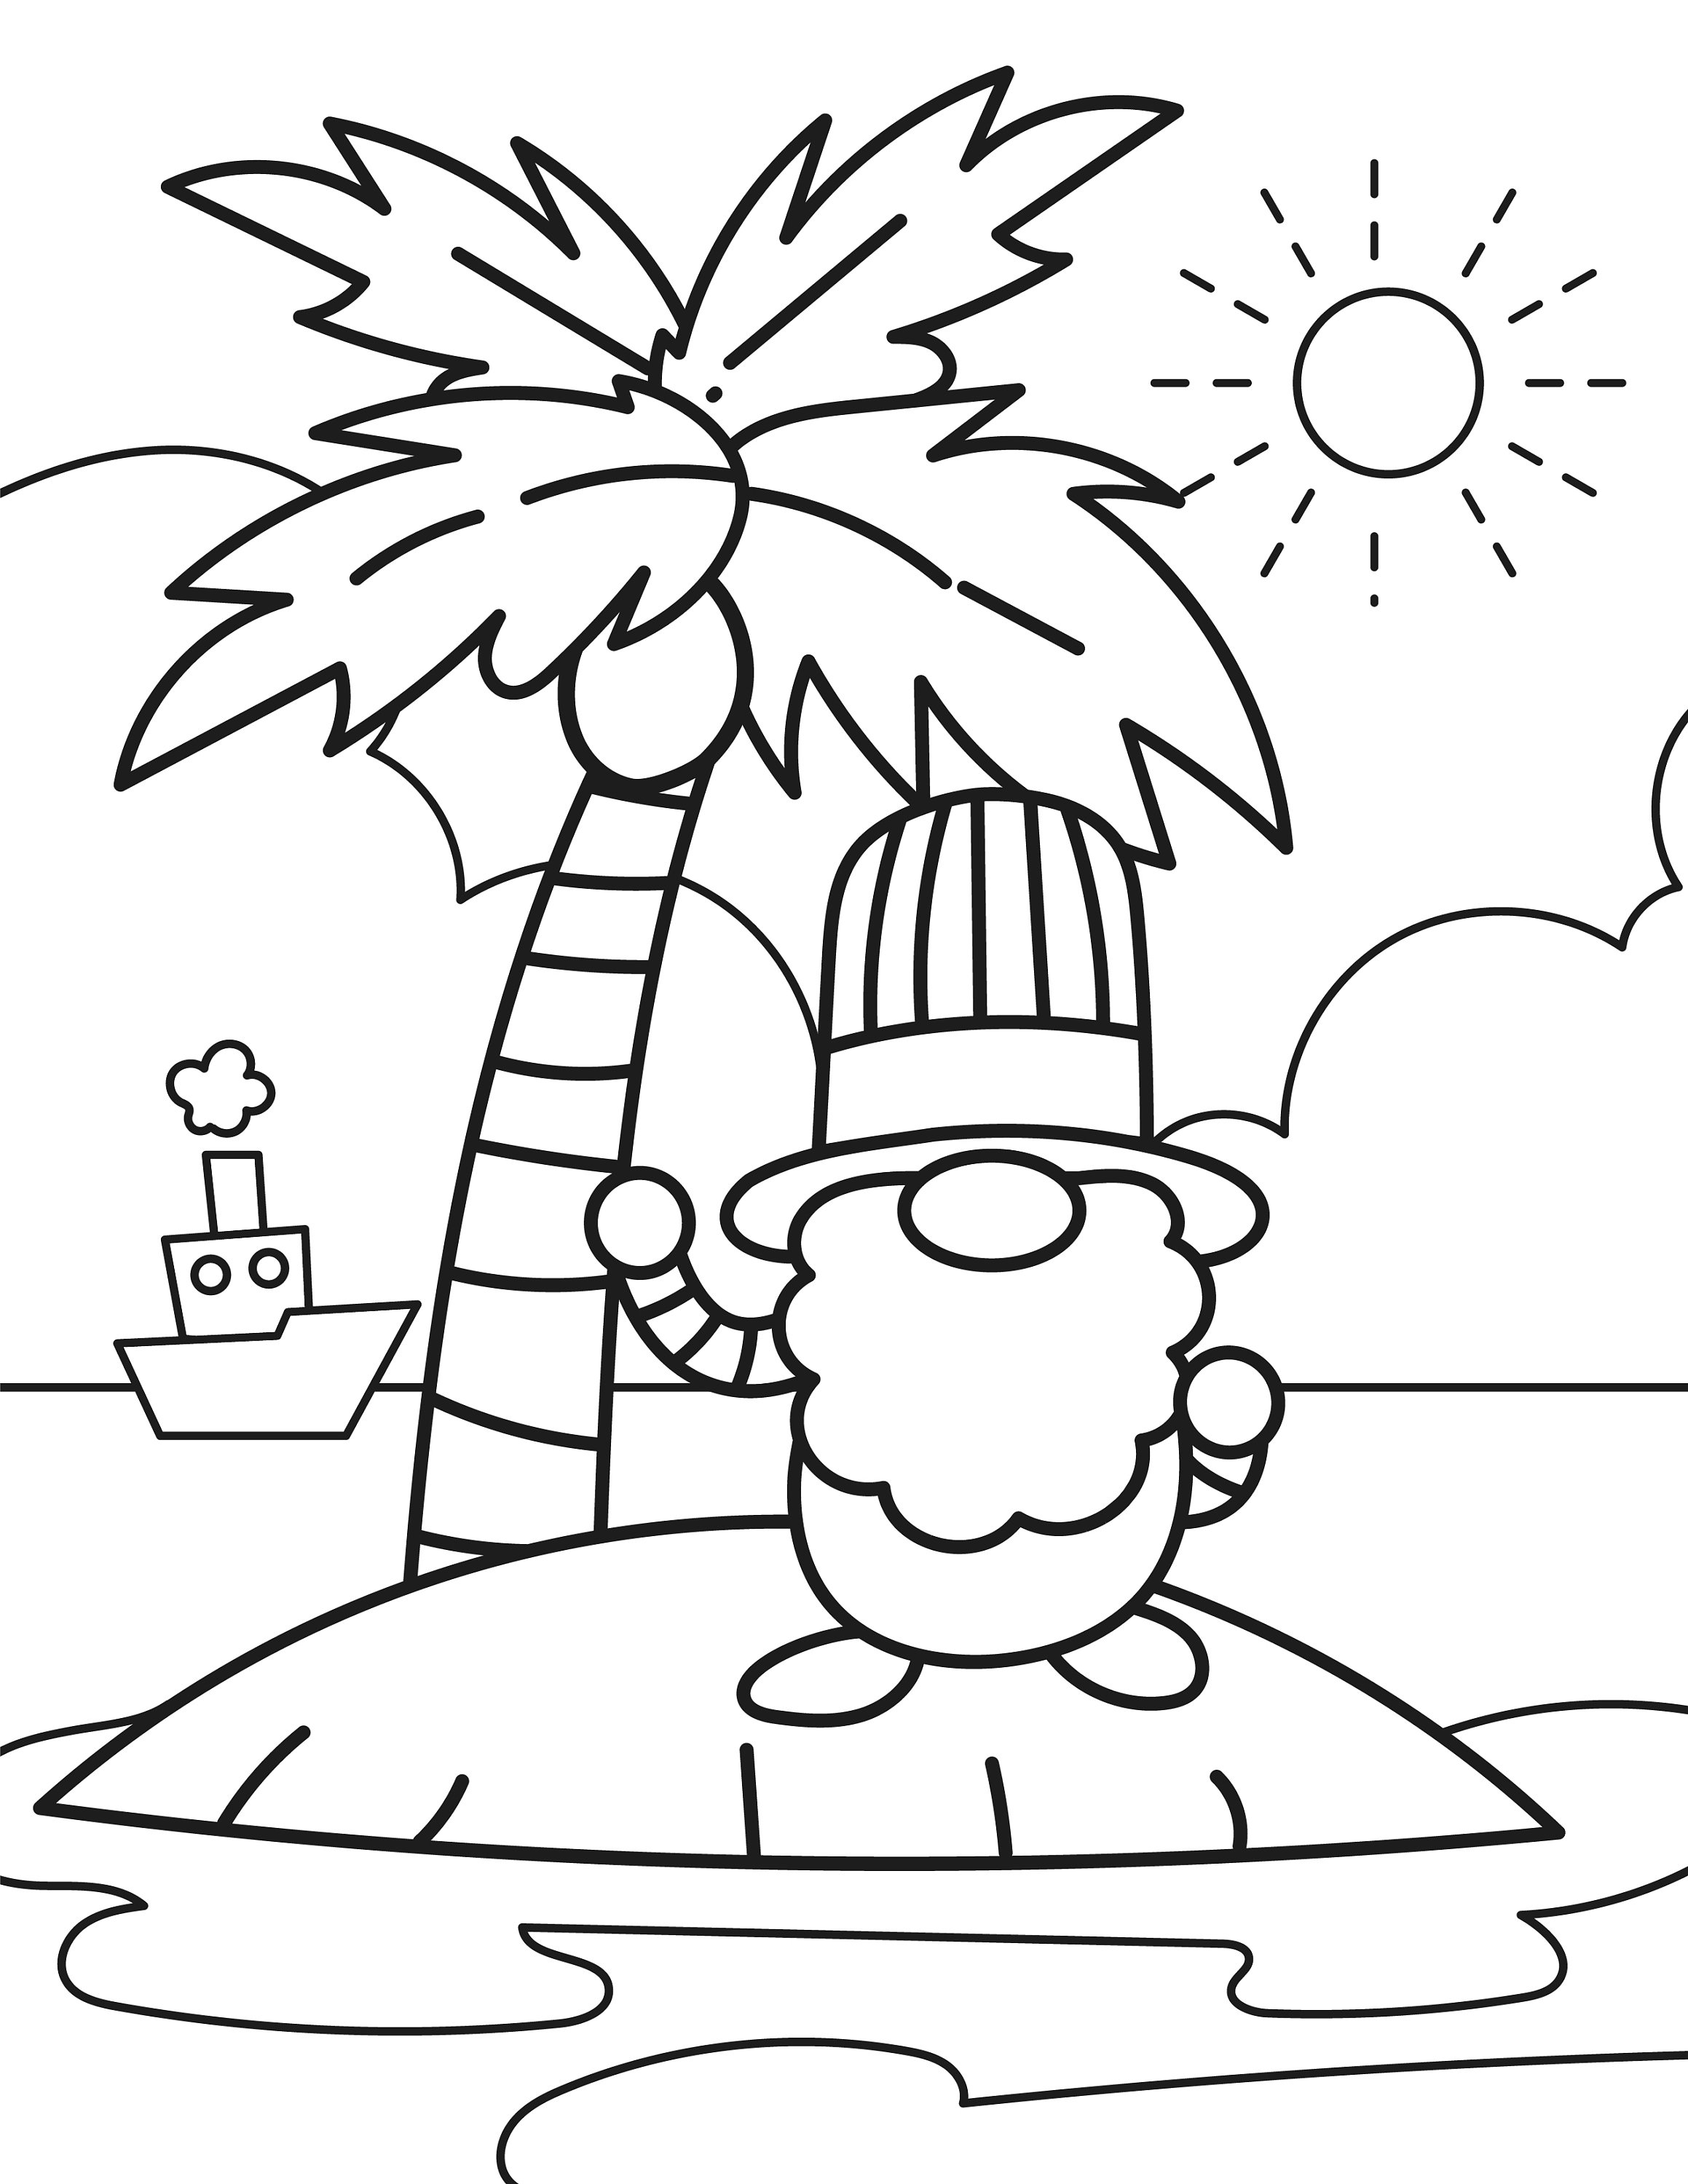 10-printable-gnome-coloring-pages-etsy-uk